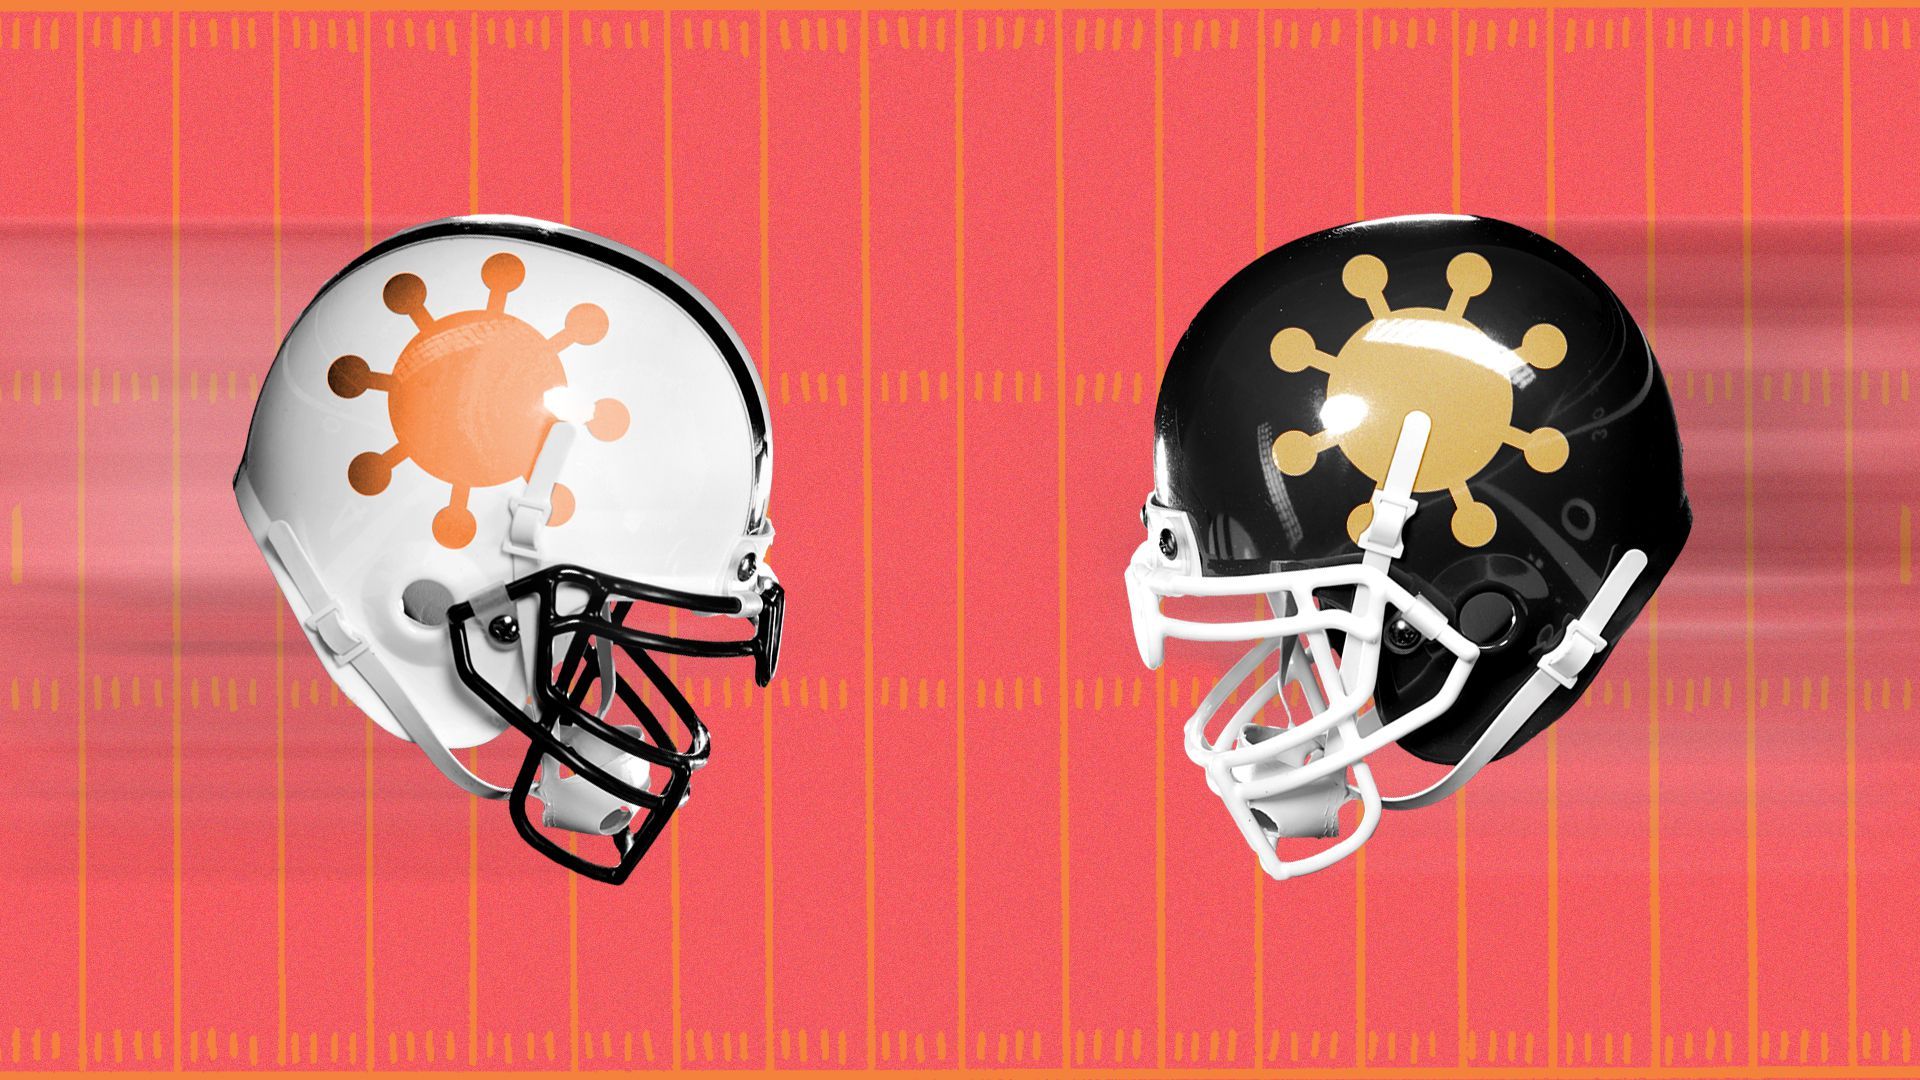 Illustration of two football helmets with coronavirus logos on them flying at each other.